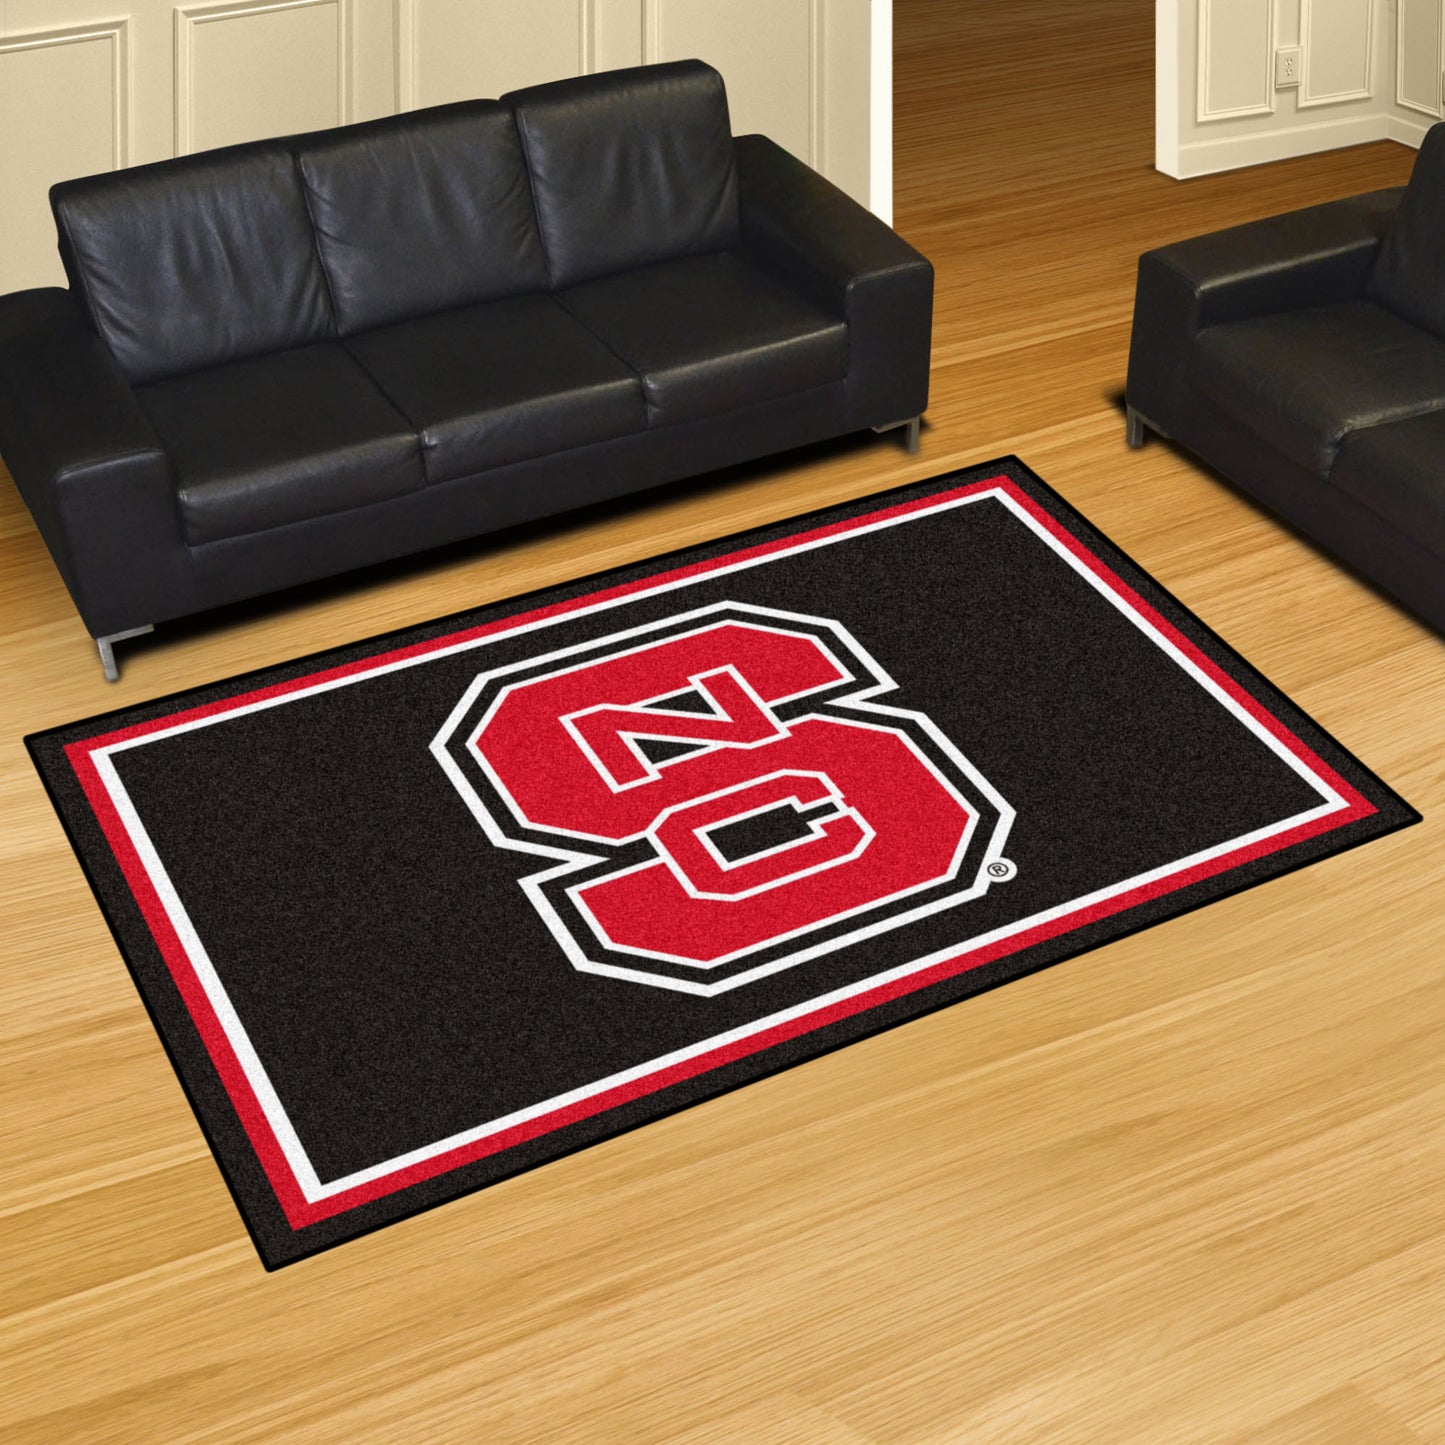 NC State Wolfpack 5ft. x 8 ft. Plush Area Rug - "NCS" Primary Logo, Black